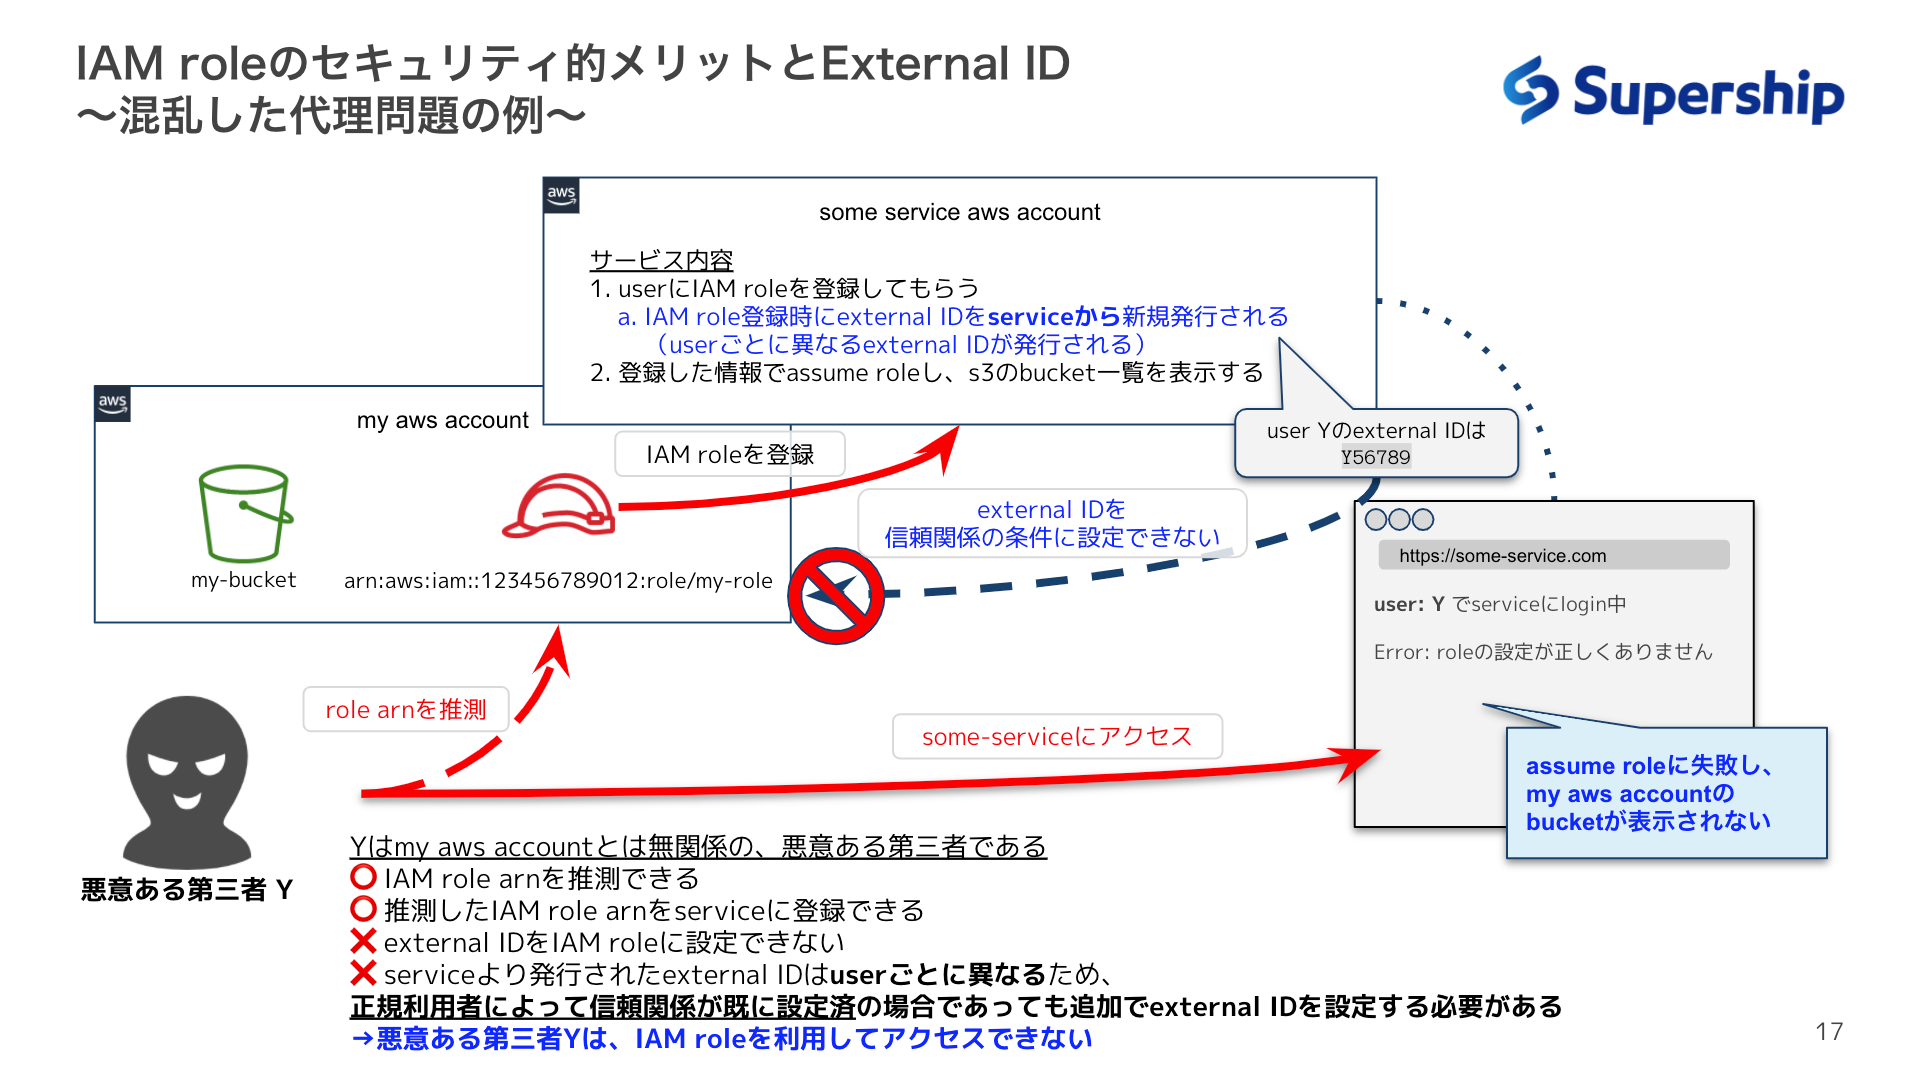 illigal user with external id